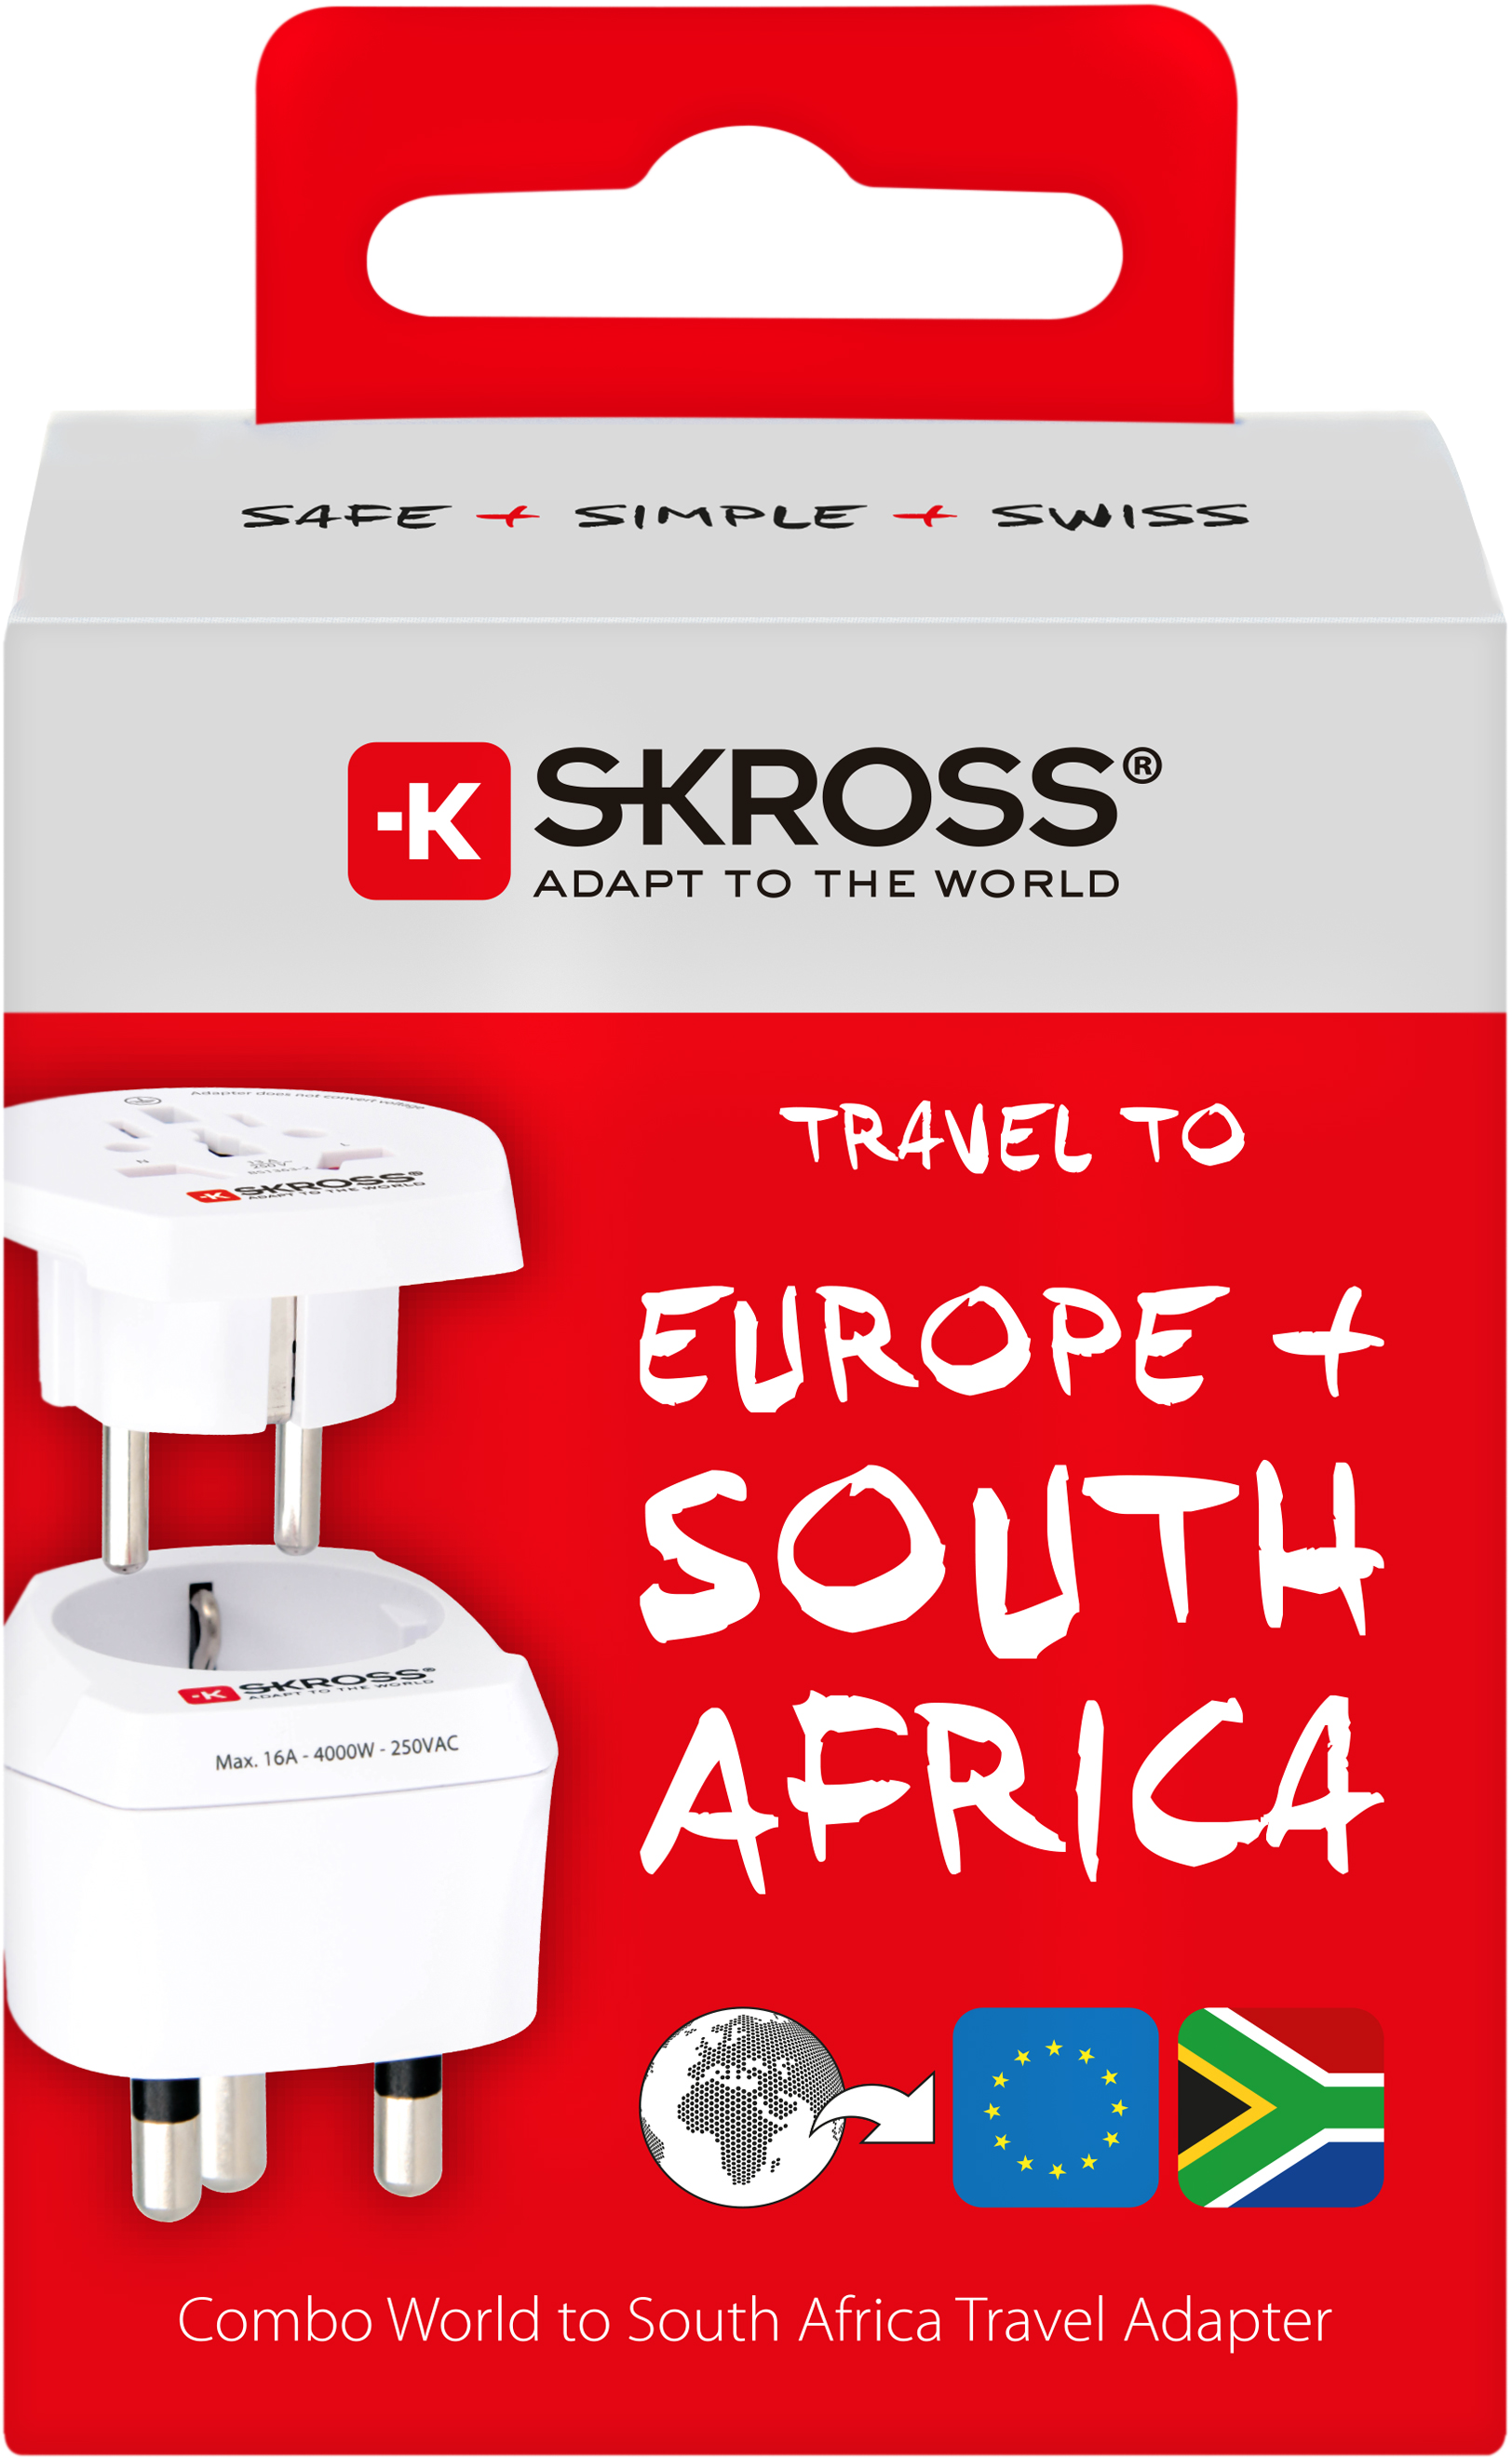 Skross 3-Pole Combo World to South Africa Travel Adapter Packaging